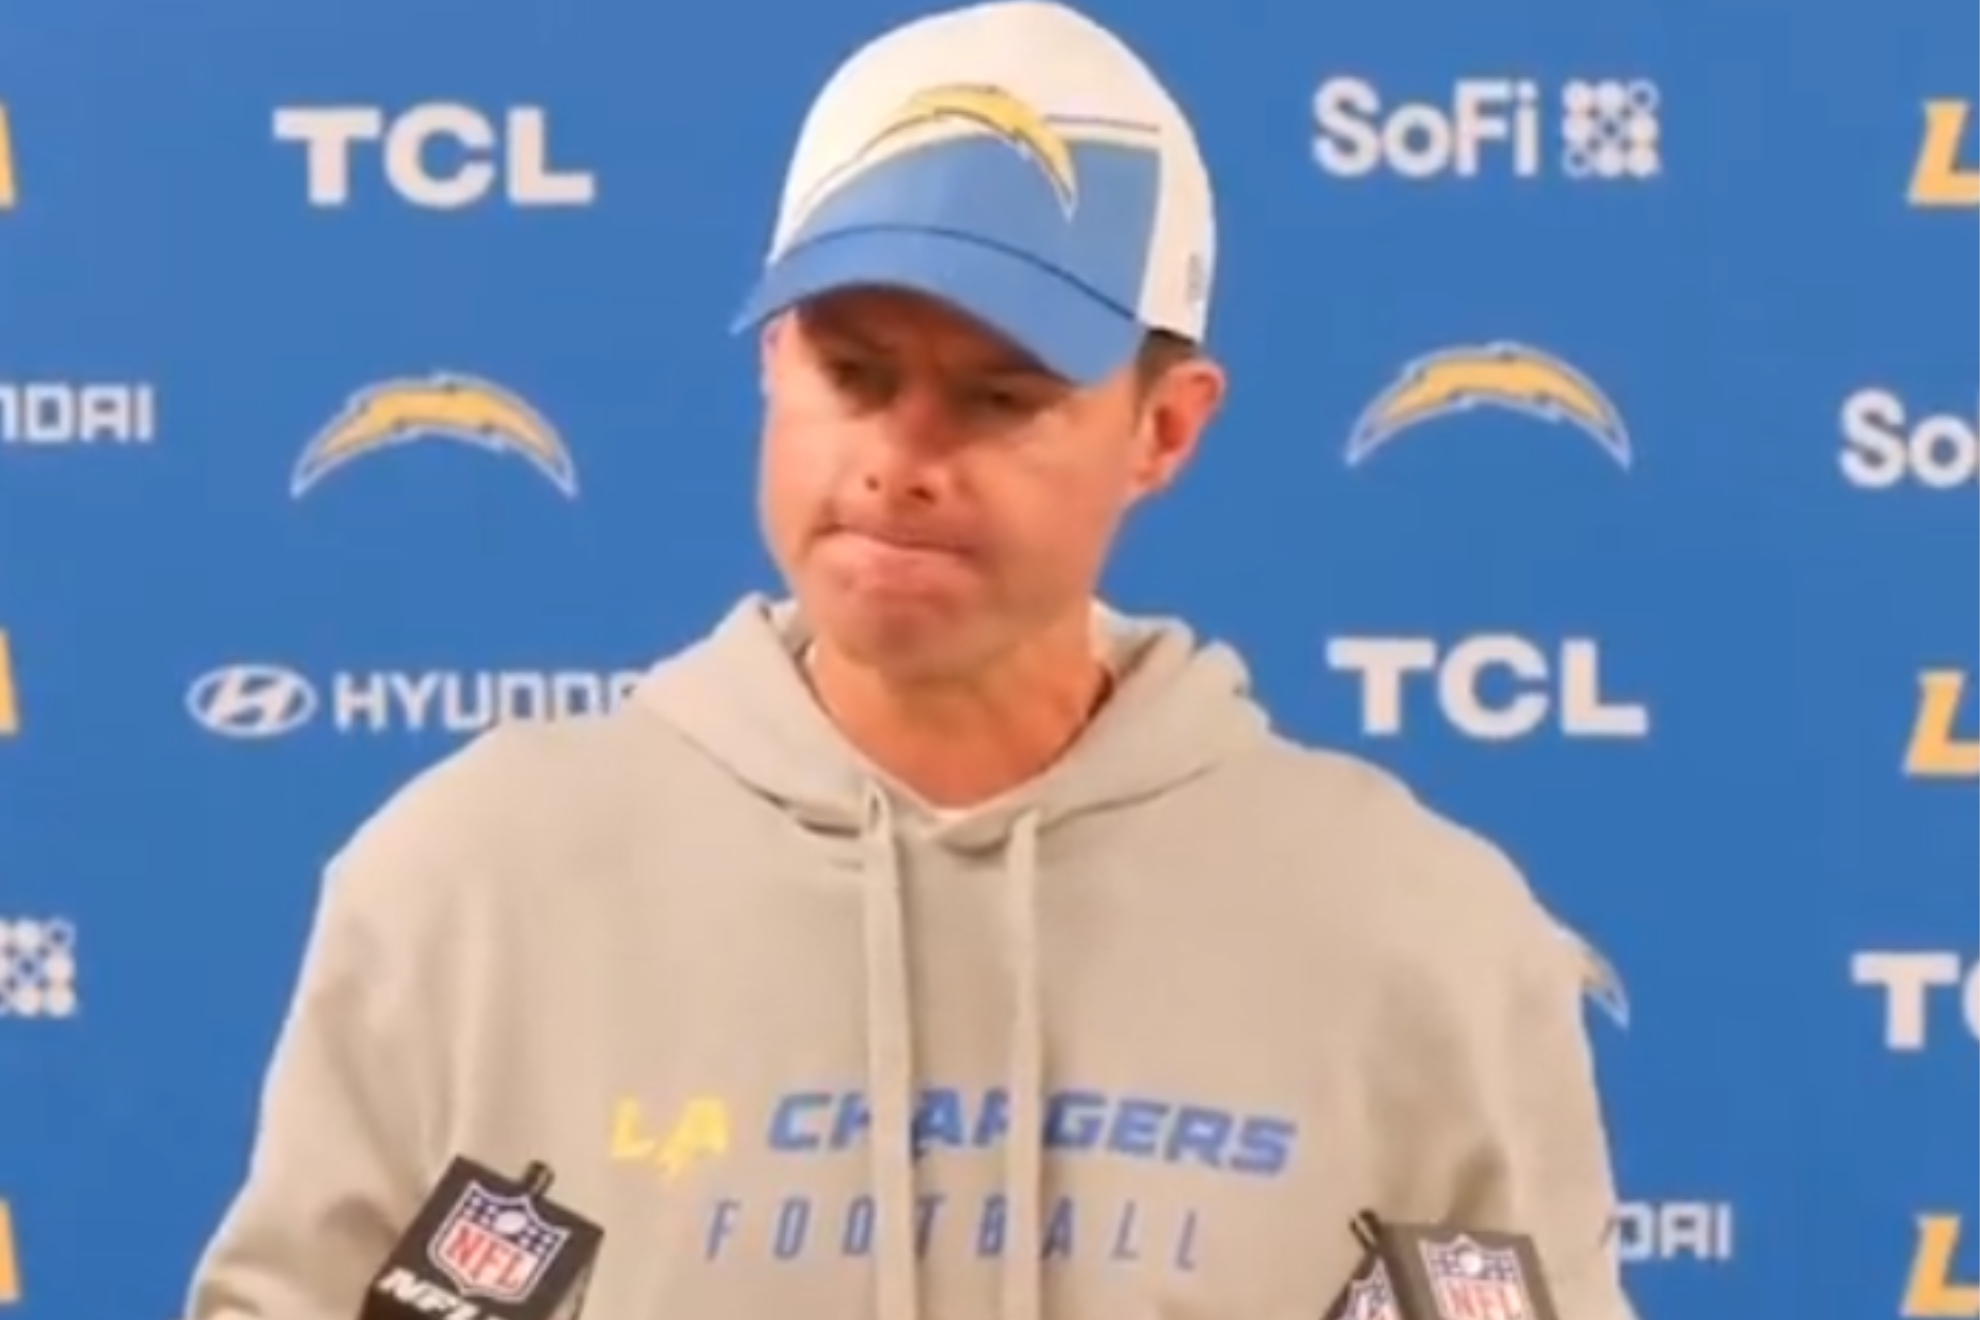 Staley's Chargers are 4-6 and unlikely to return to the playoffs.